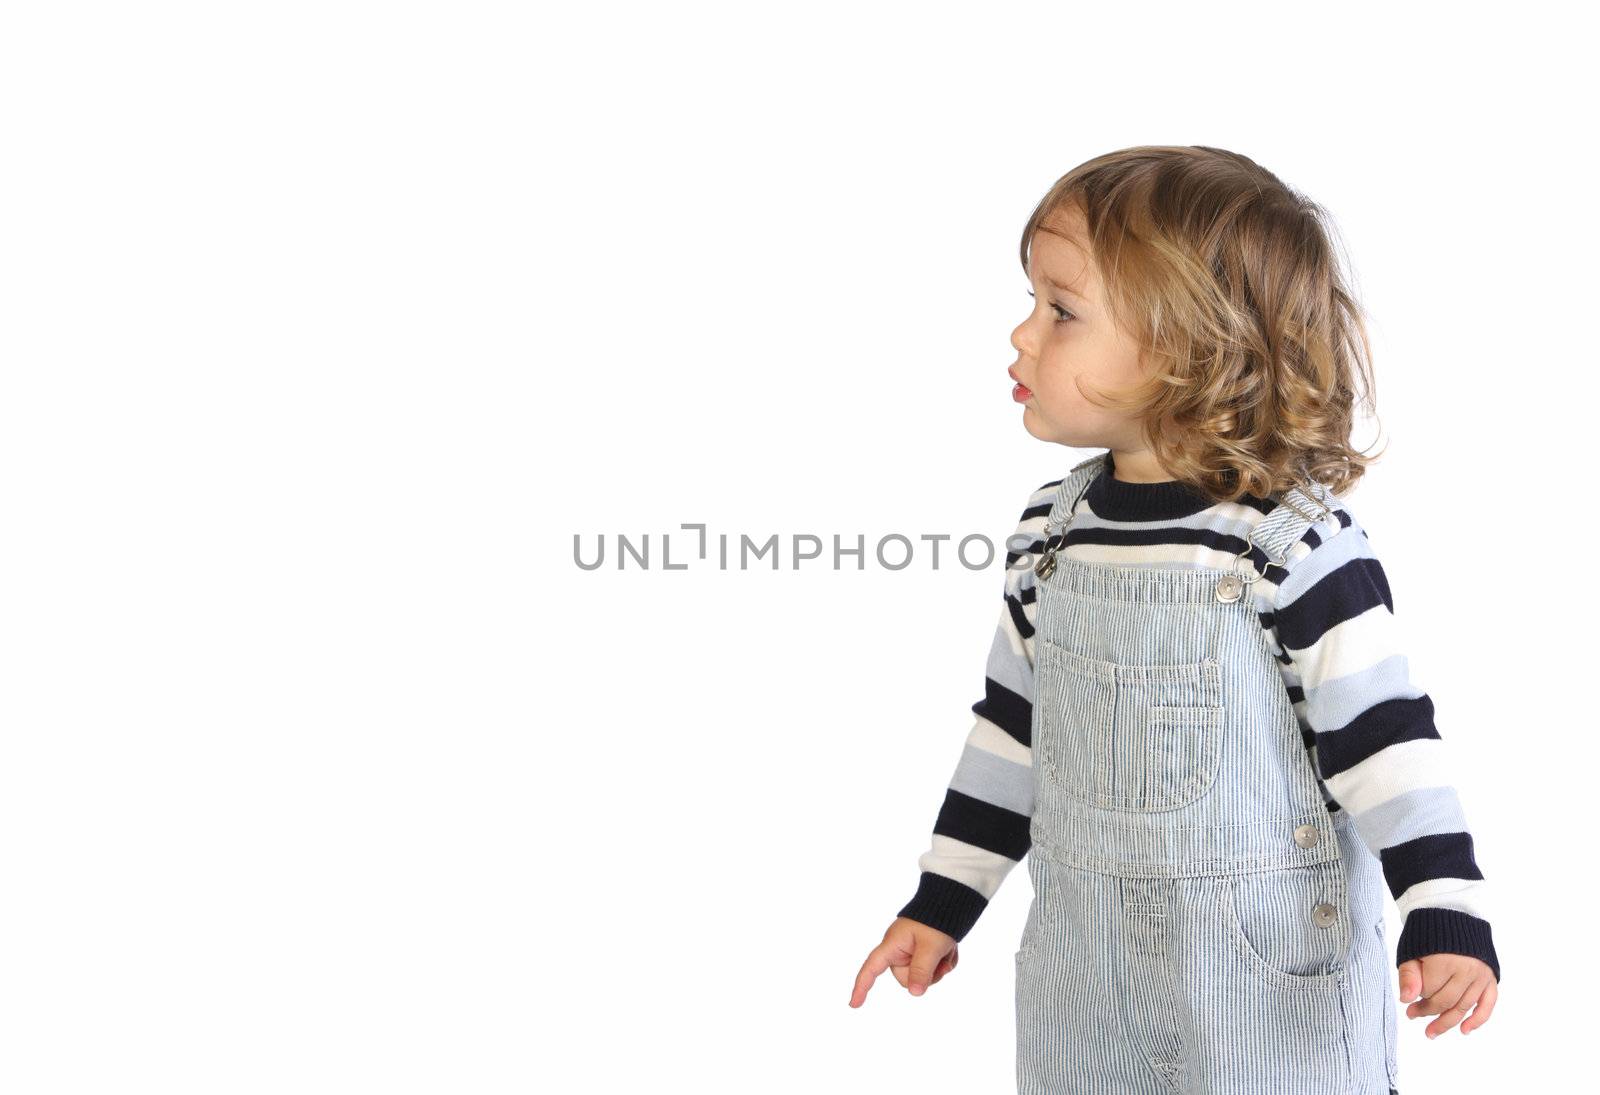 beauty a little girl on white background